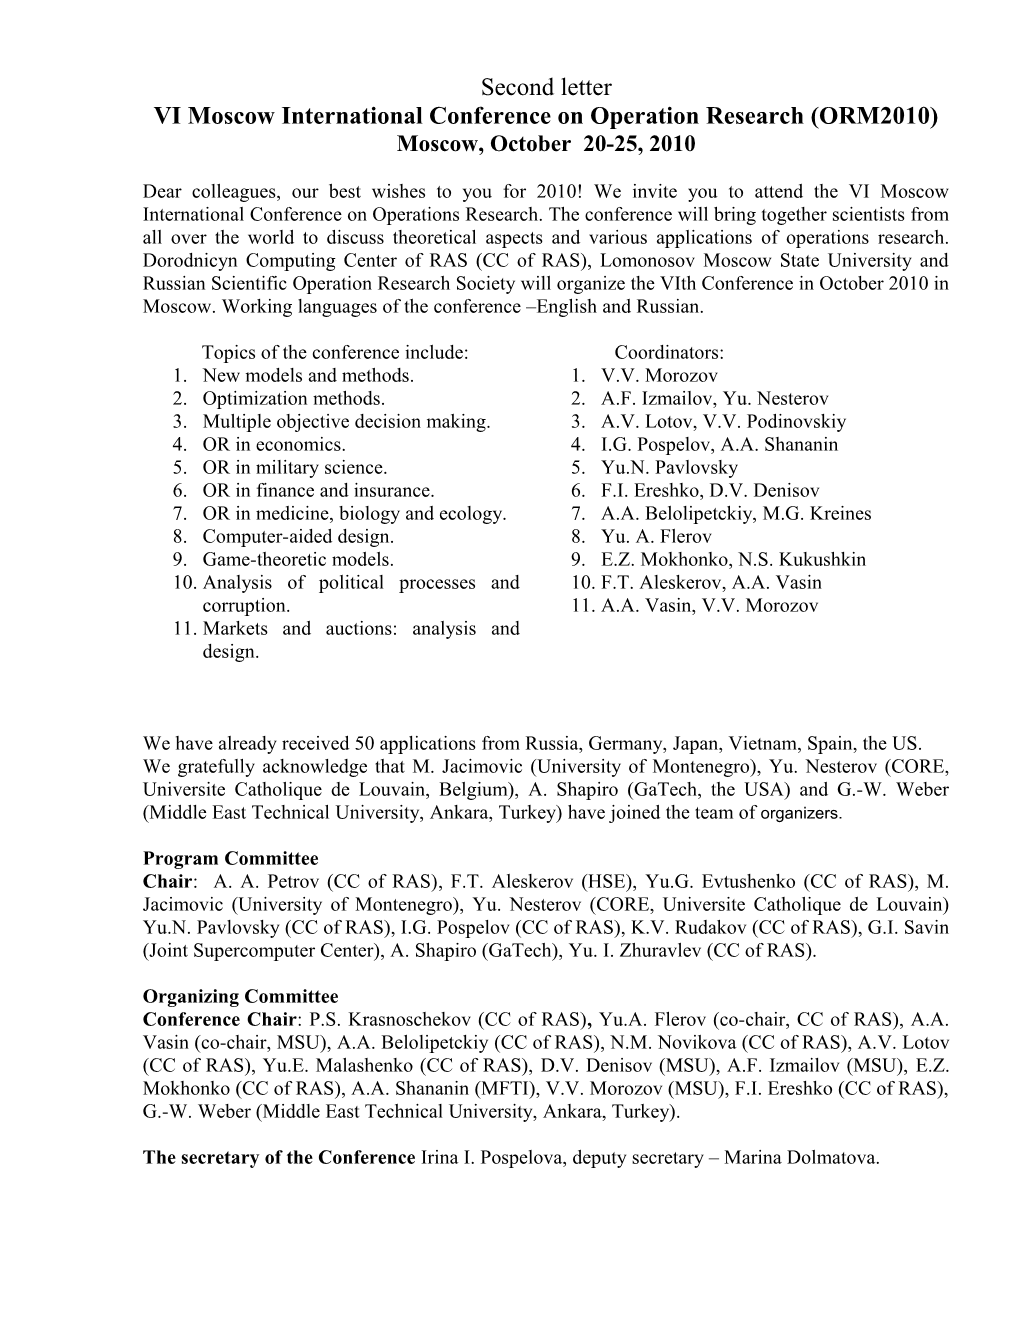 V Moscow International Conference on Operations Research (ORM2007)